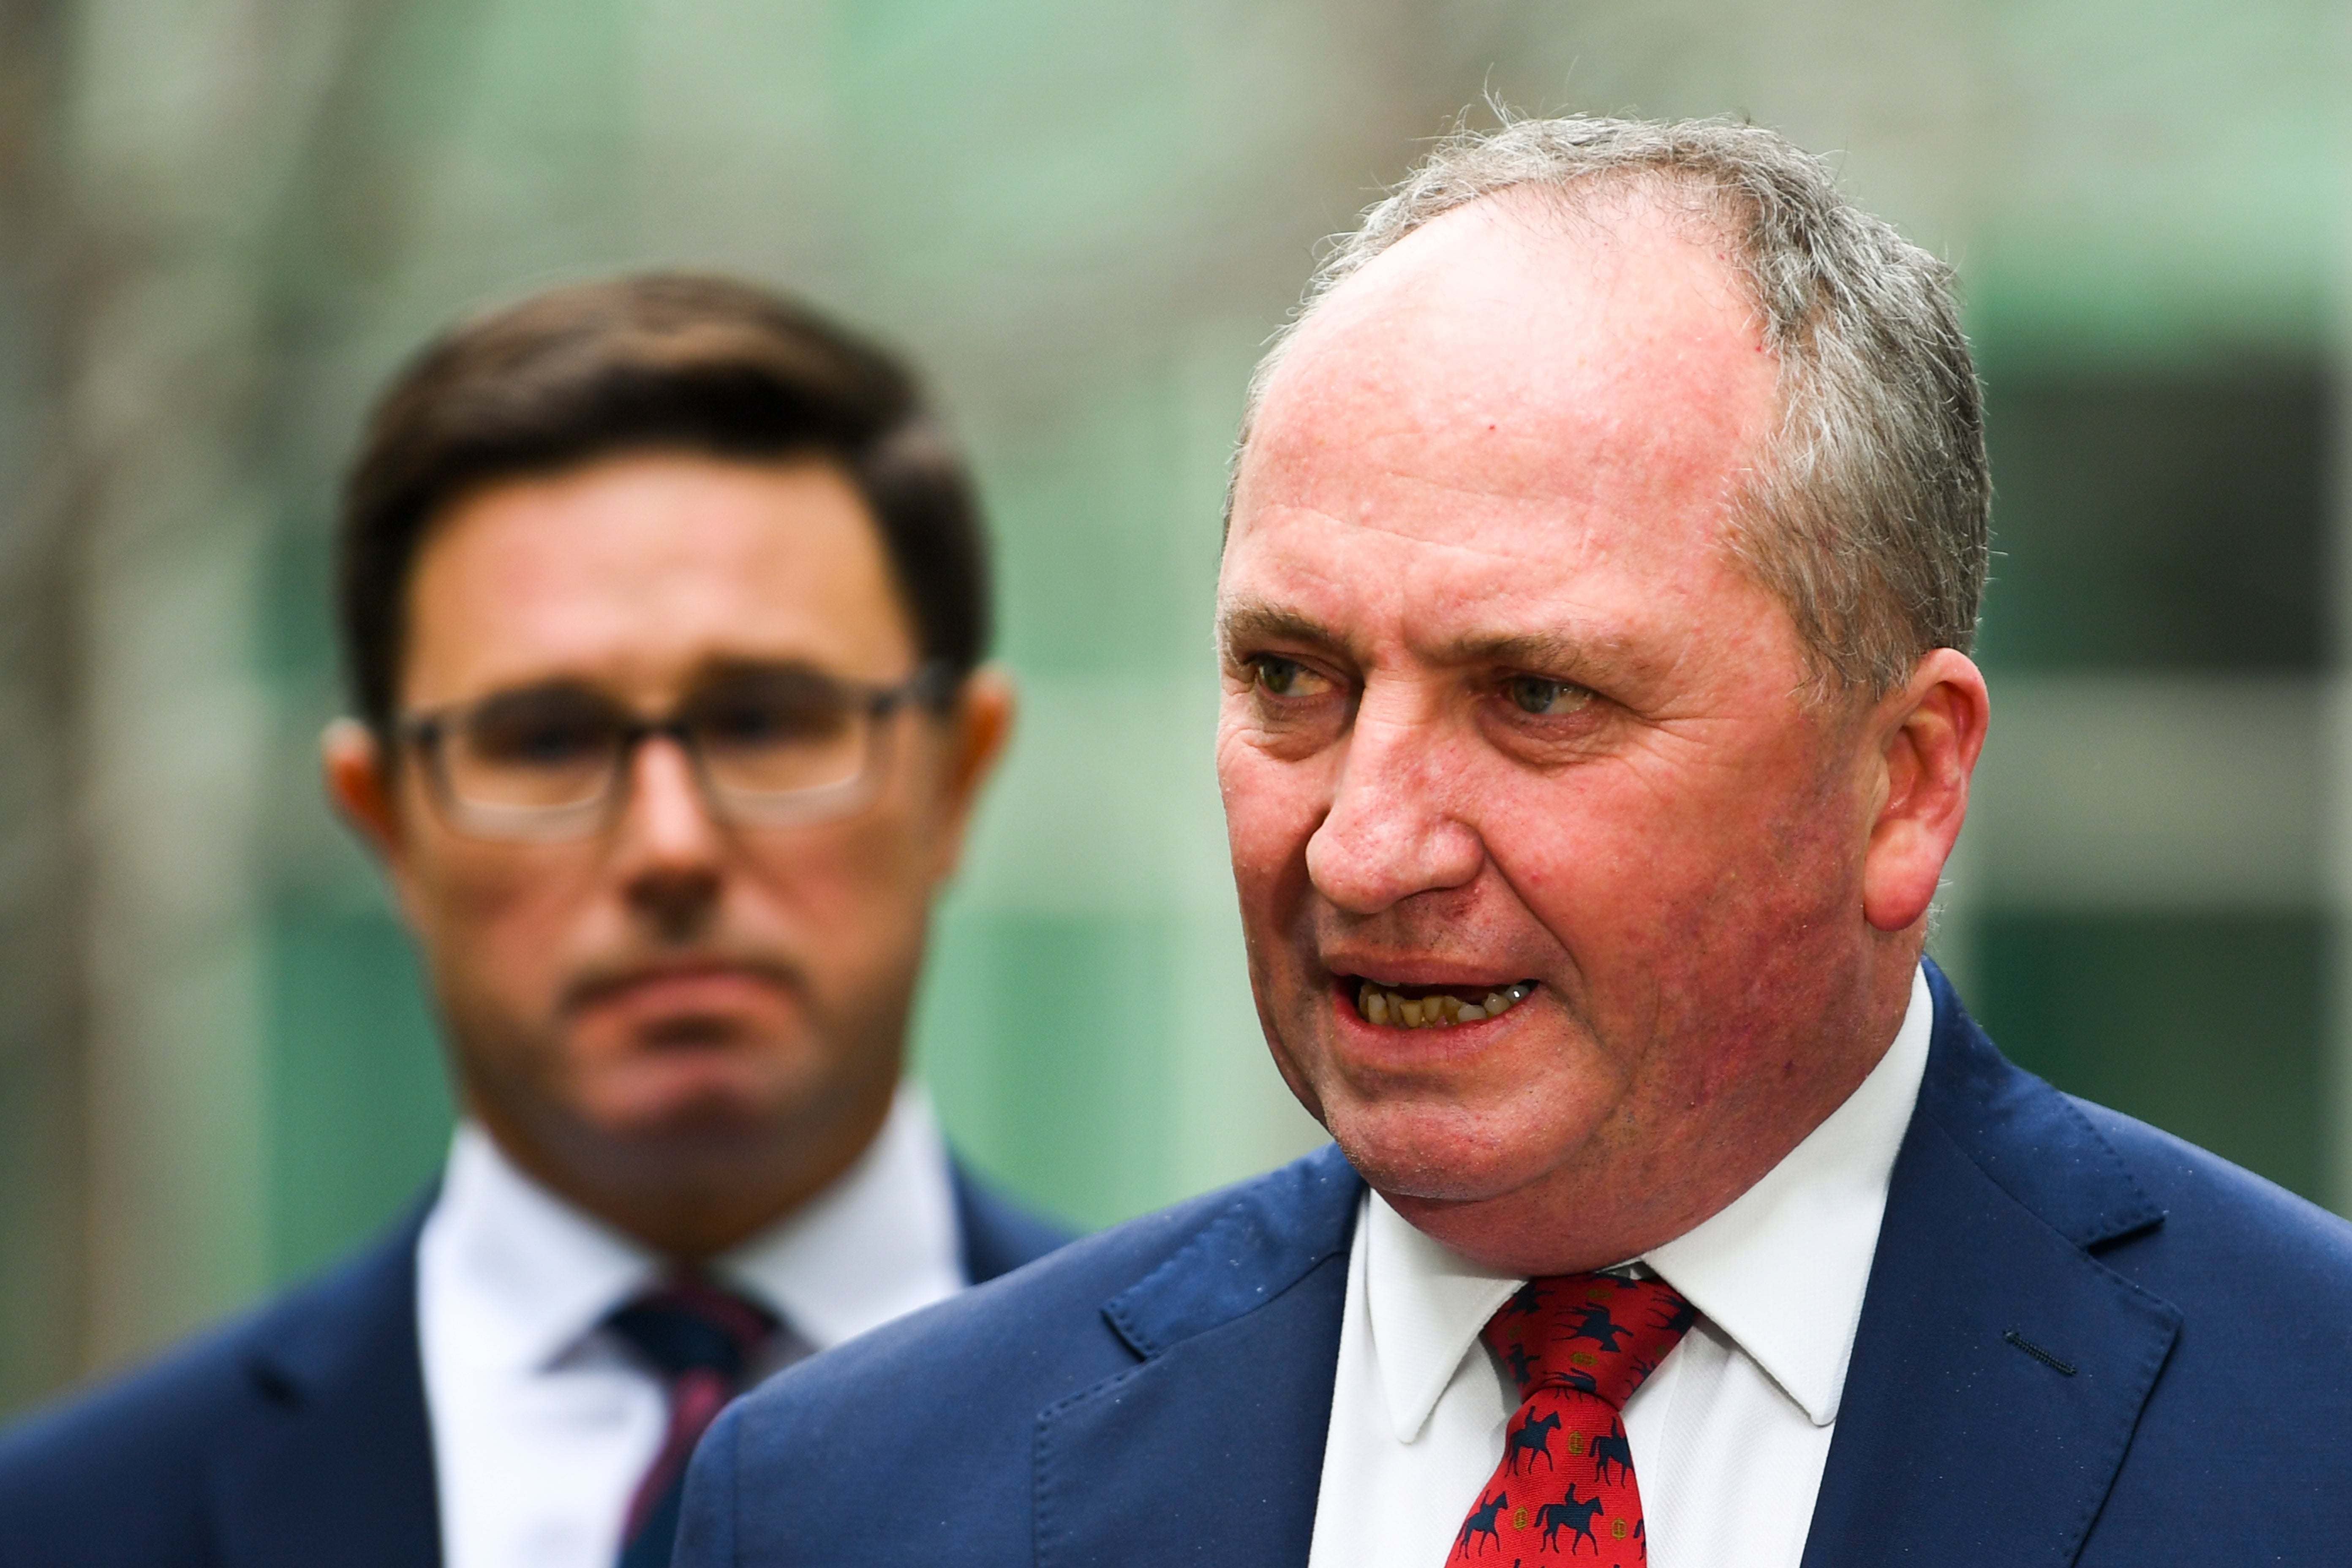 File photo: Australia’s deputy prime minister, Barnaby Joyce, has tested positive for coronavirus after visit to the UK